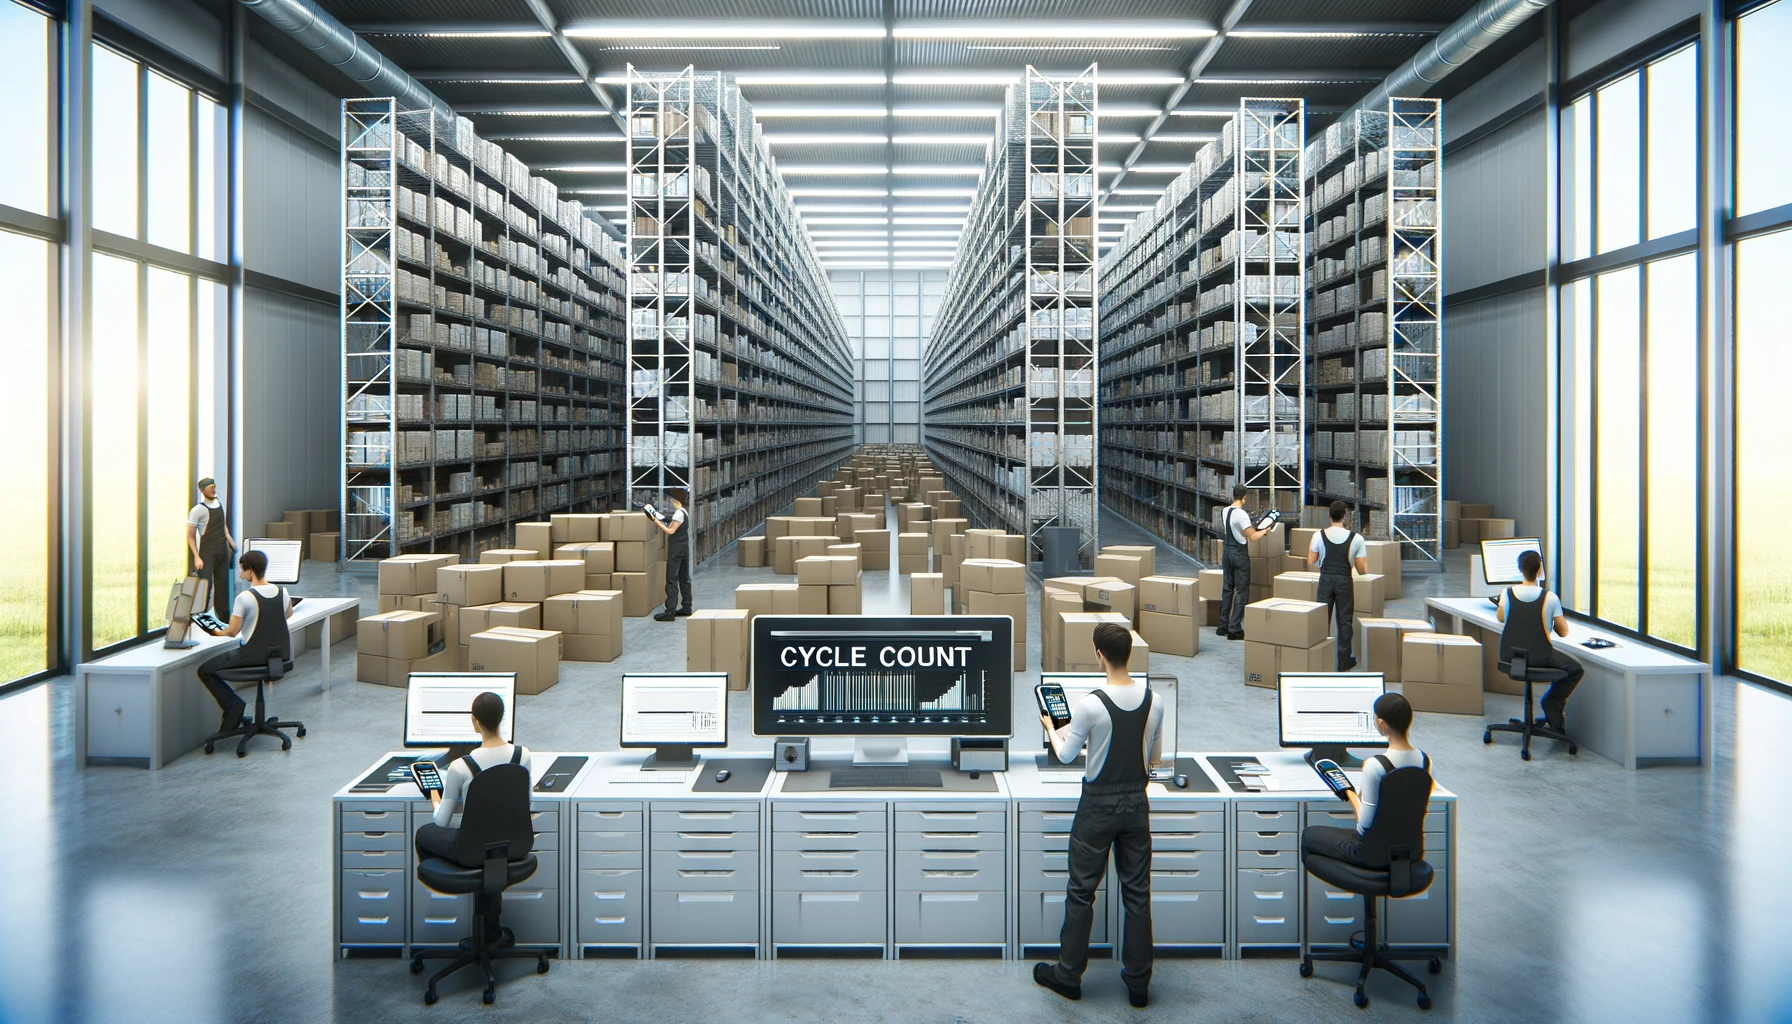 Modern warehouse interior highlighting 'Cycle Count' inventory control. The scene shows a different layout with workers using scanners among well-organized shelves packed with various-sized boxes, emphasizing a technology-driven approach to inventory management. The term 'Cycle Count' is prominently displayed